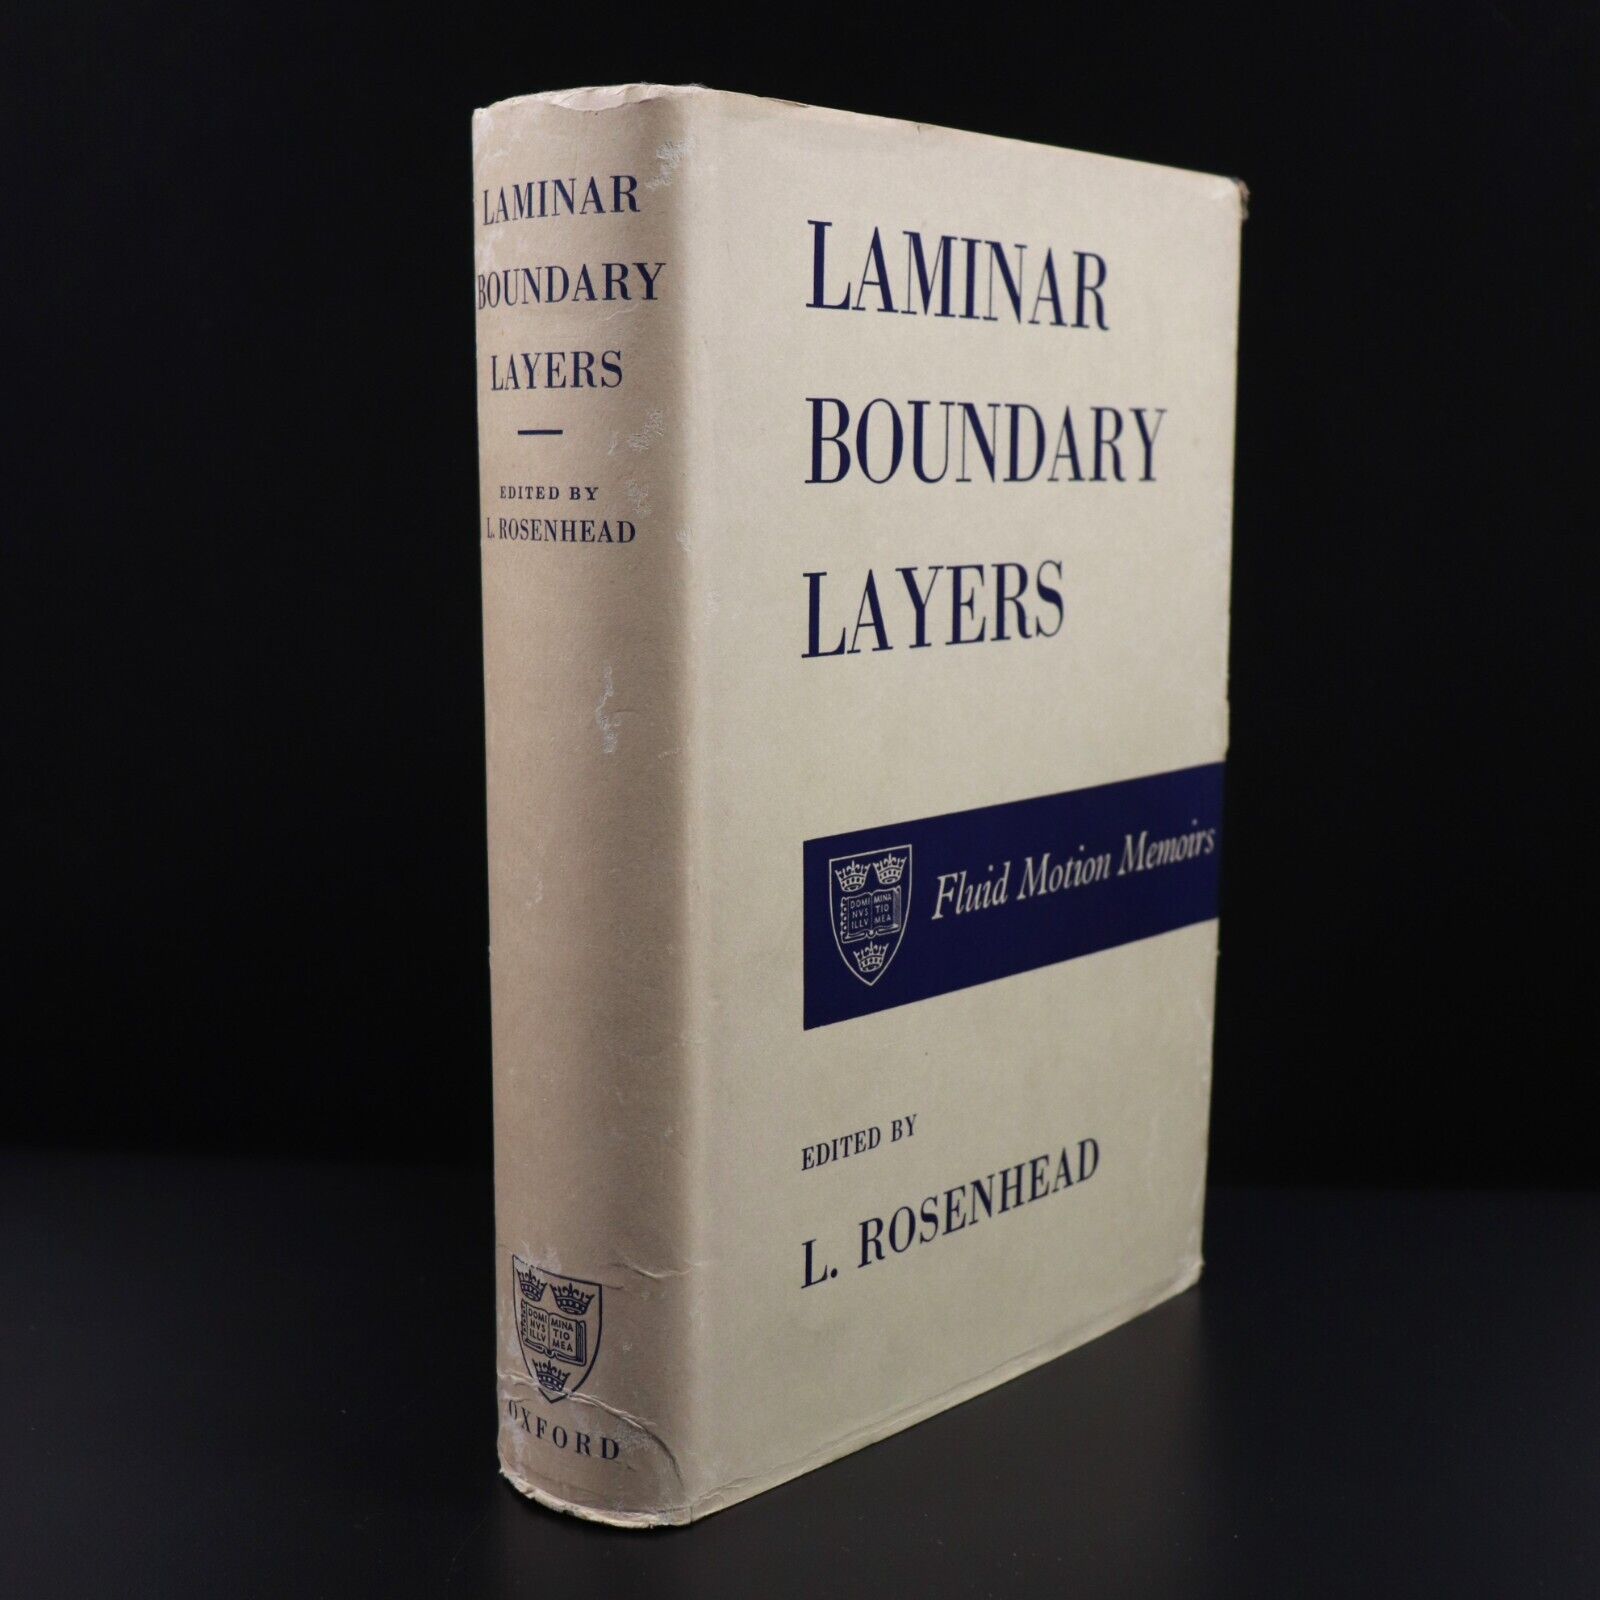 1966 Laminar Boundary Layers by L. Rosenhead Vintage Science Reference Book